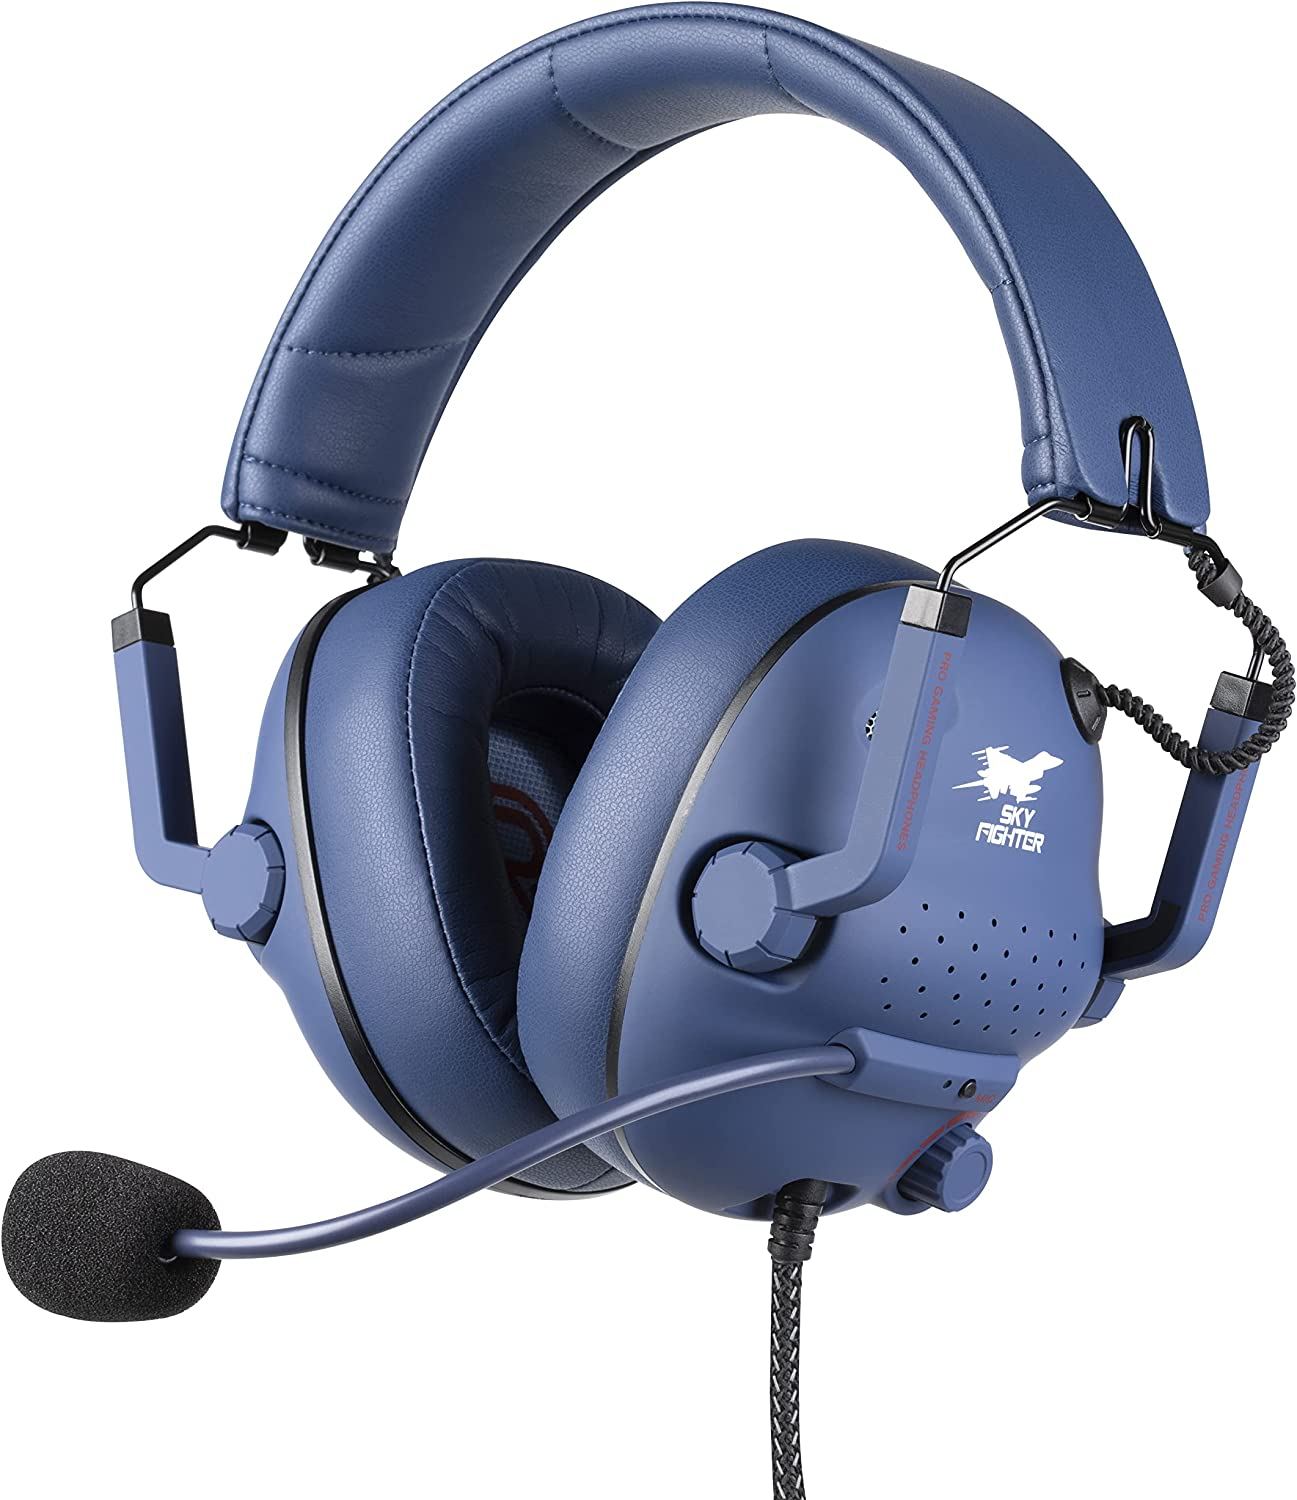 Gaming Headset for Konix (Blue) for Skyfighter PC Windows